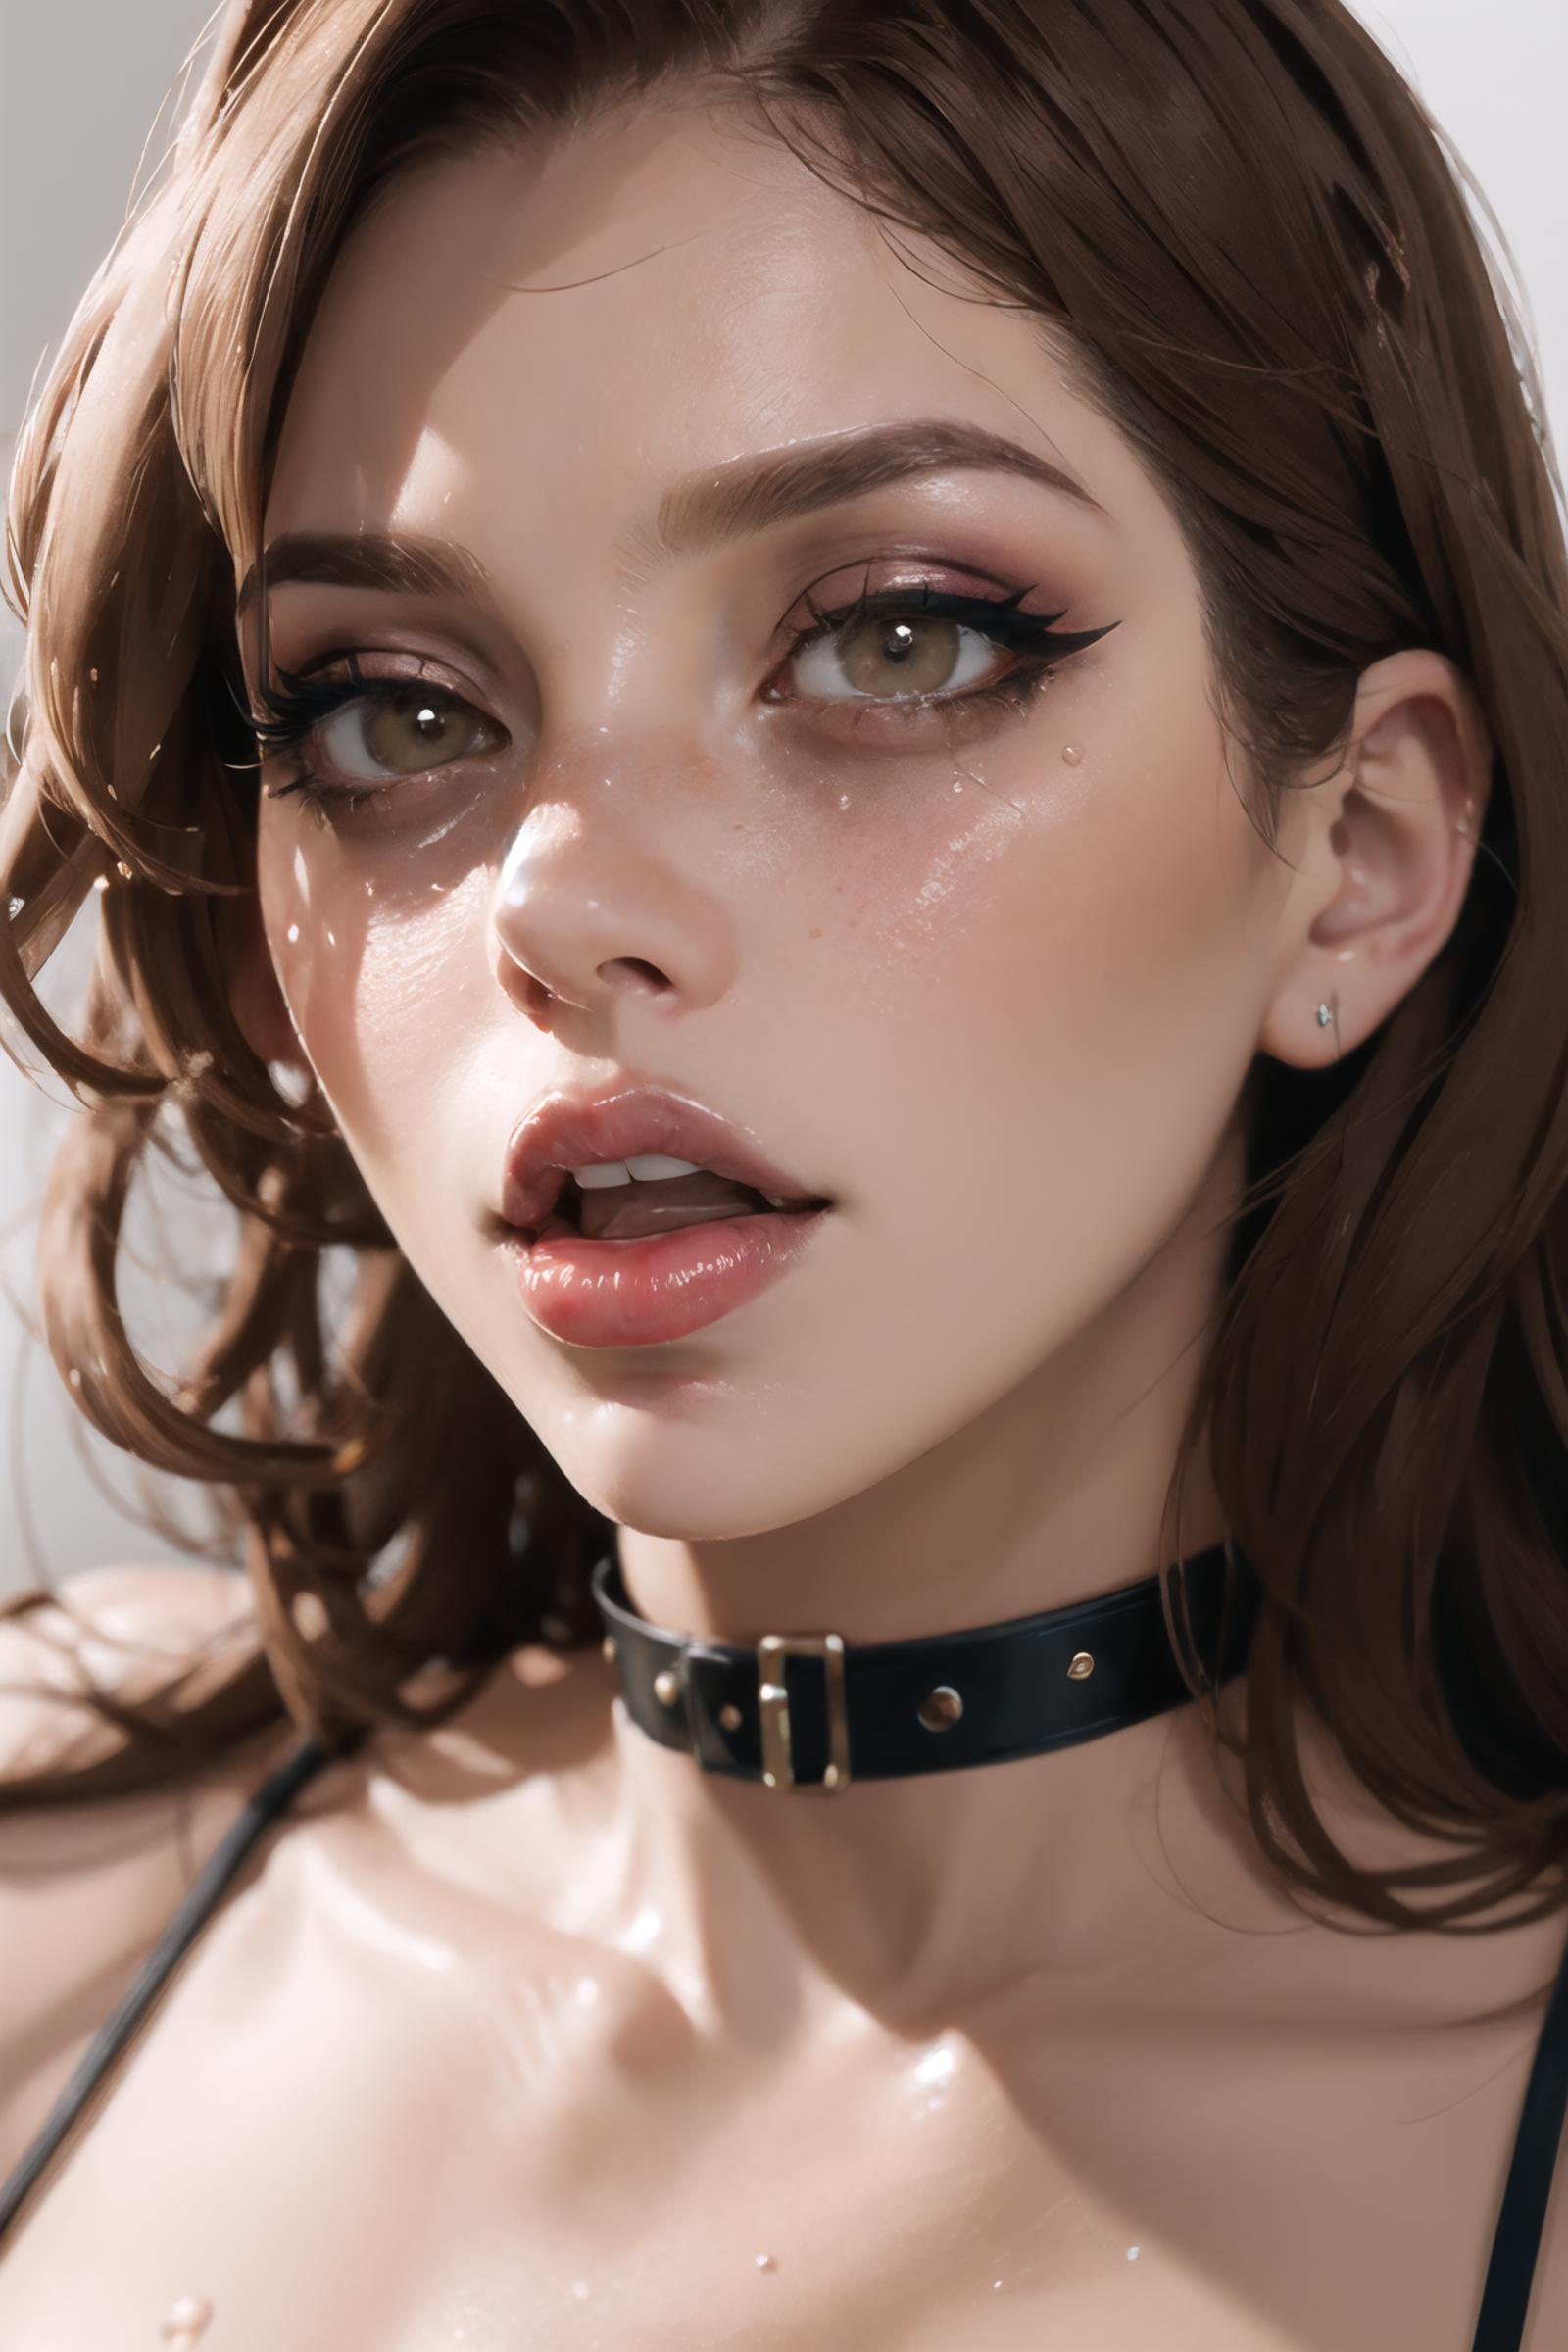 A brown-haired woman with a black choker necklace and pink lips.